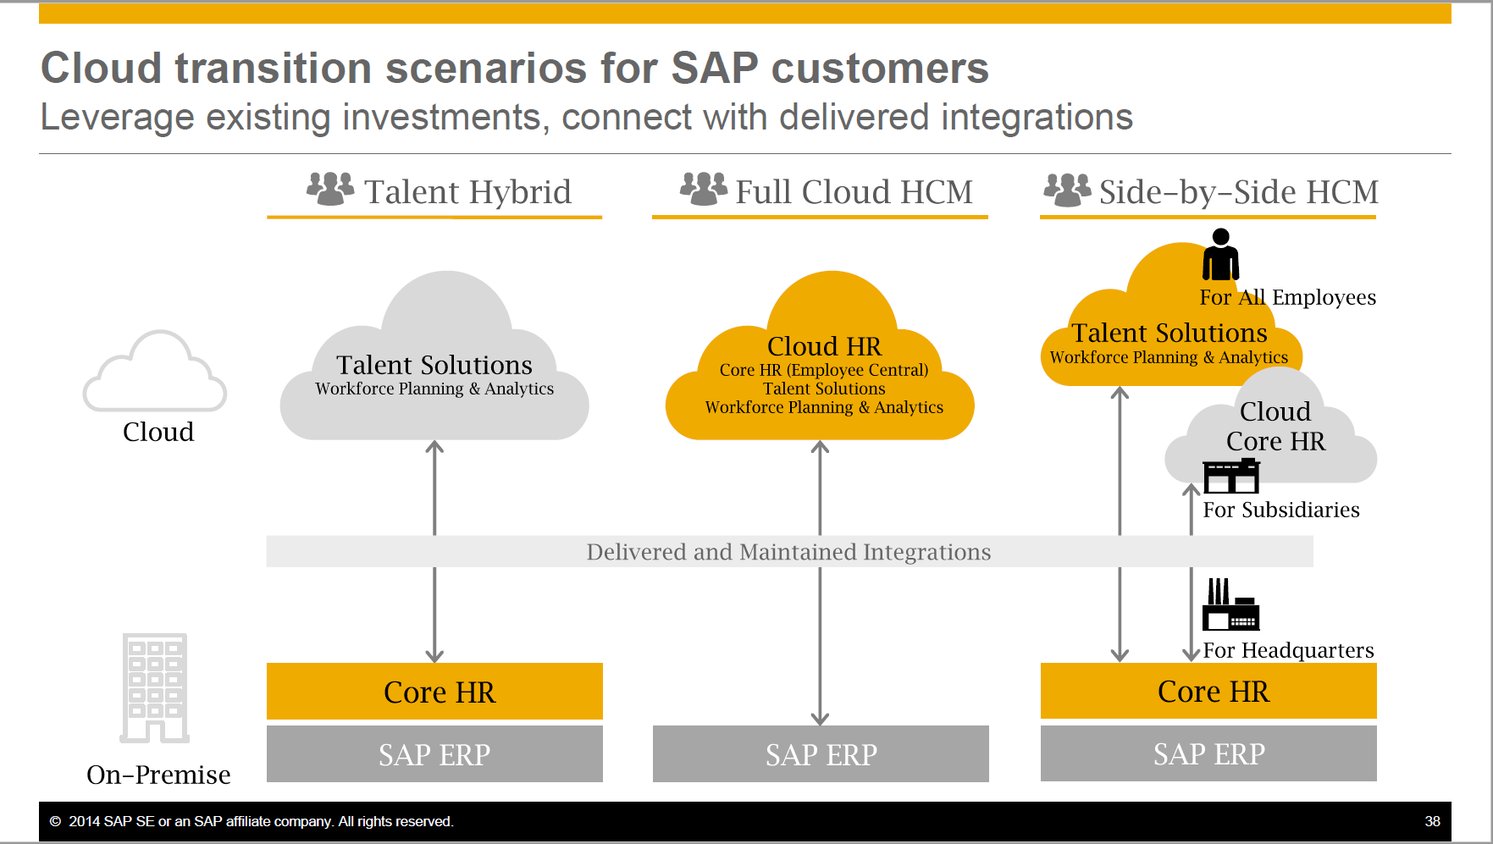 SAP HCM On-Premise but who also deployed SAP SuccessFactors Employee Central